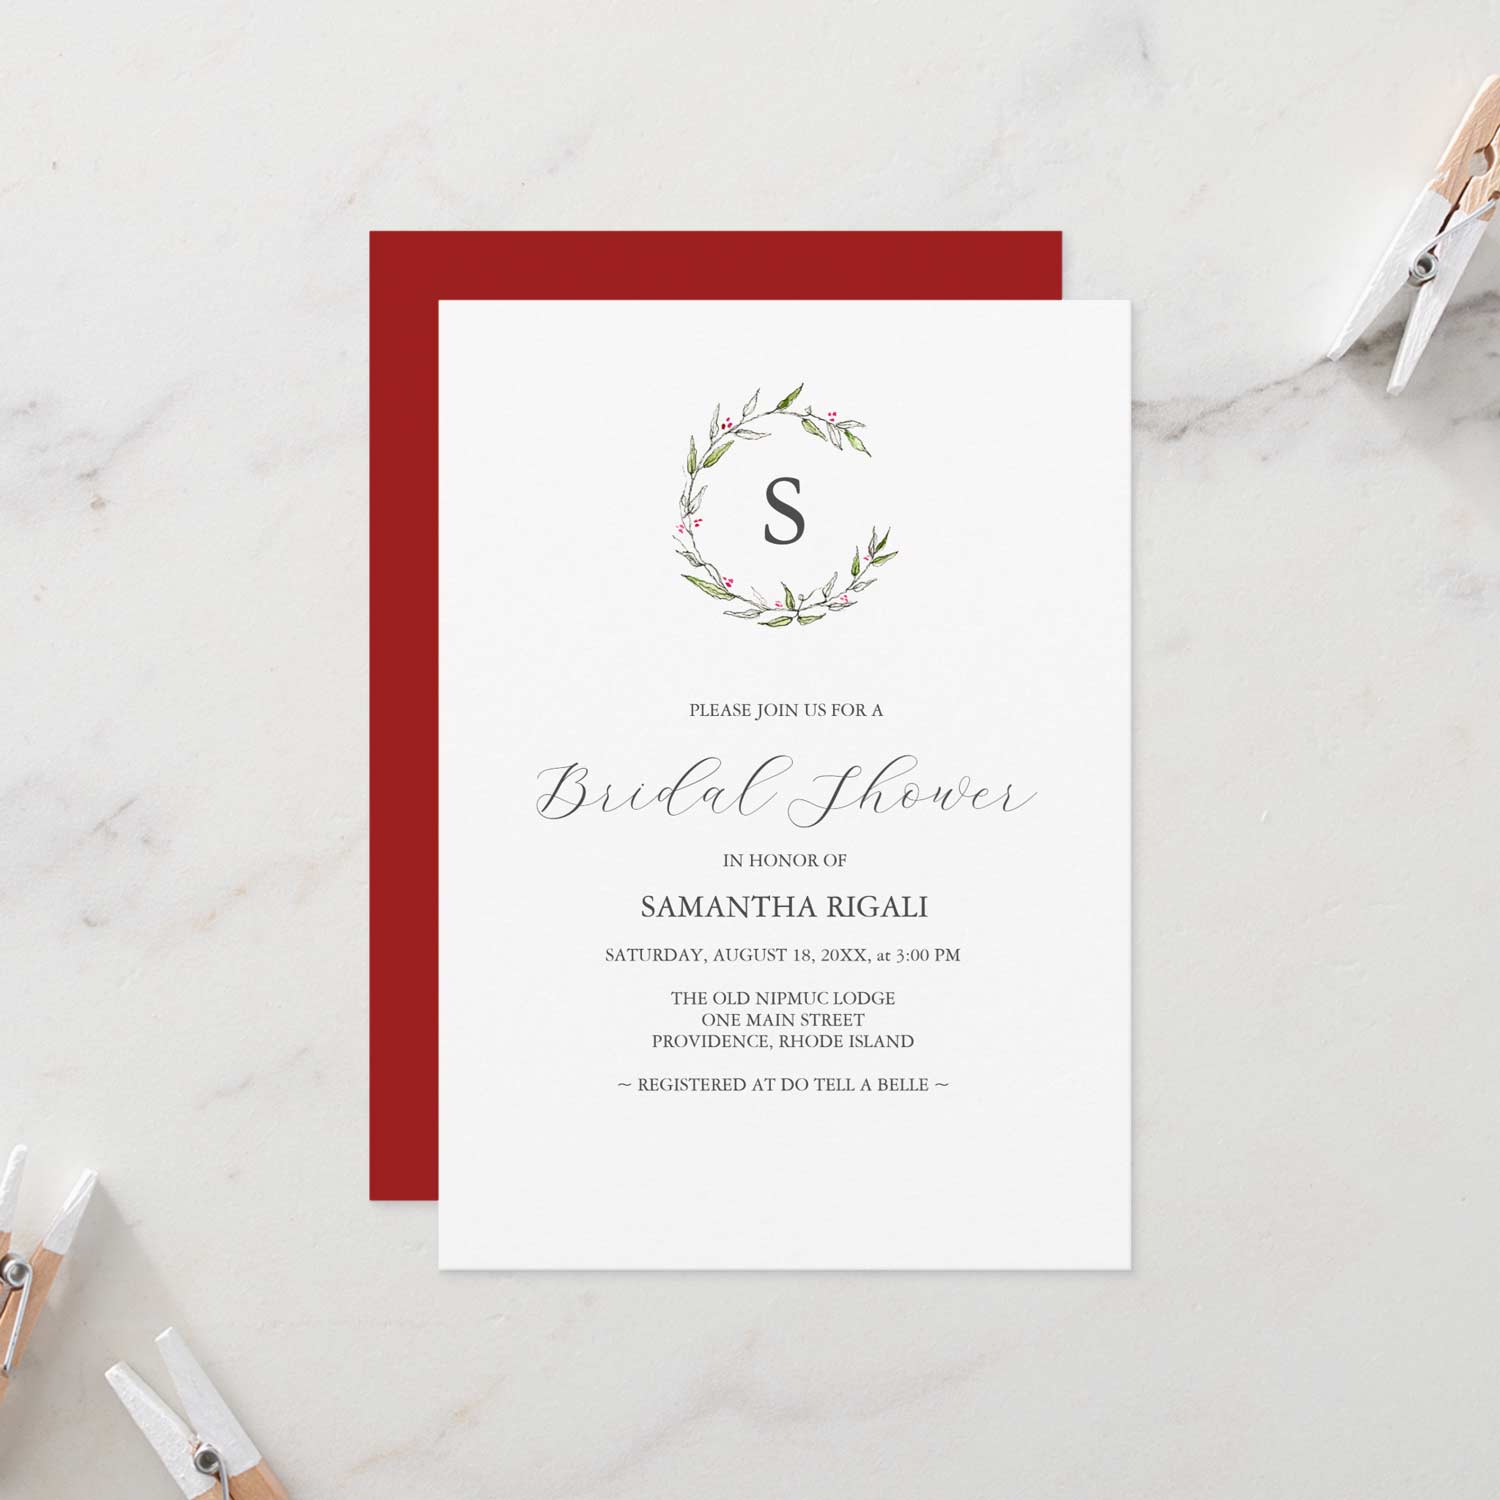 Minimalistic line art winter bridal shower invitations features the bride to be's monogrammed initial. Click to shop.